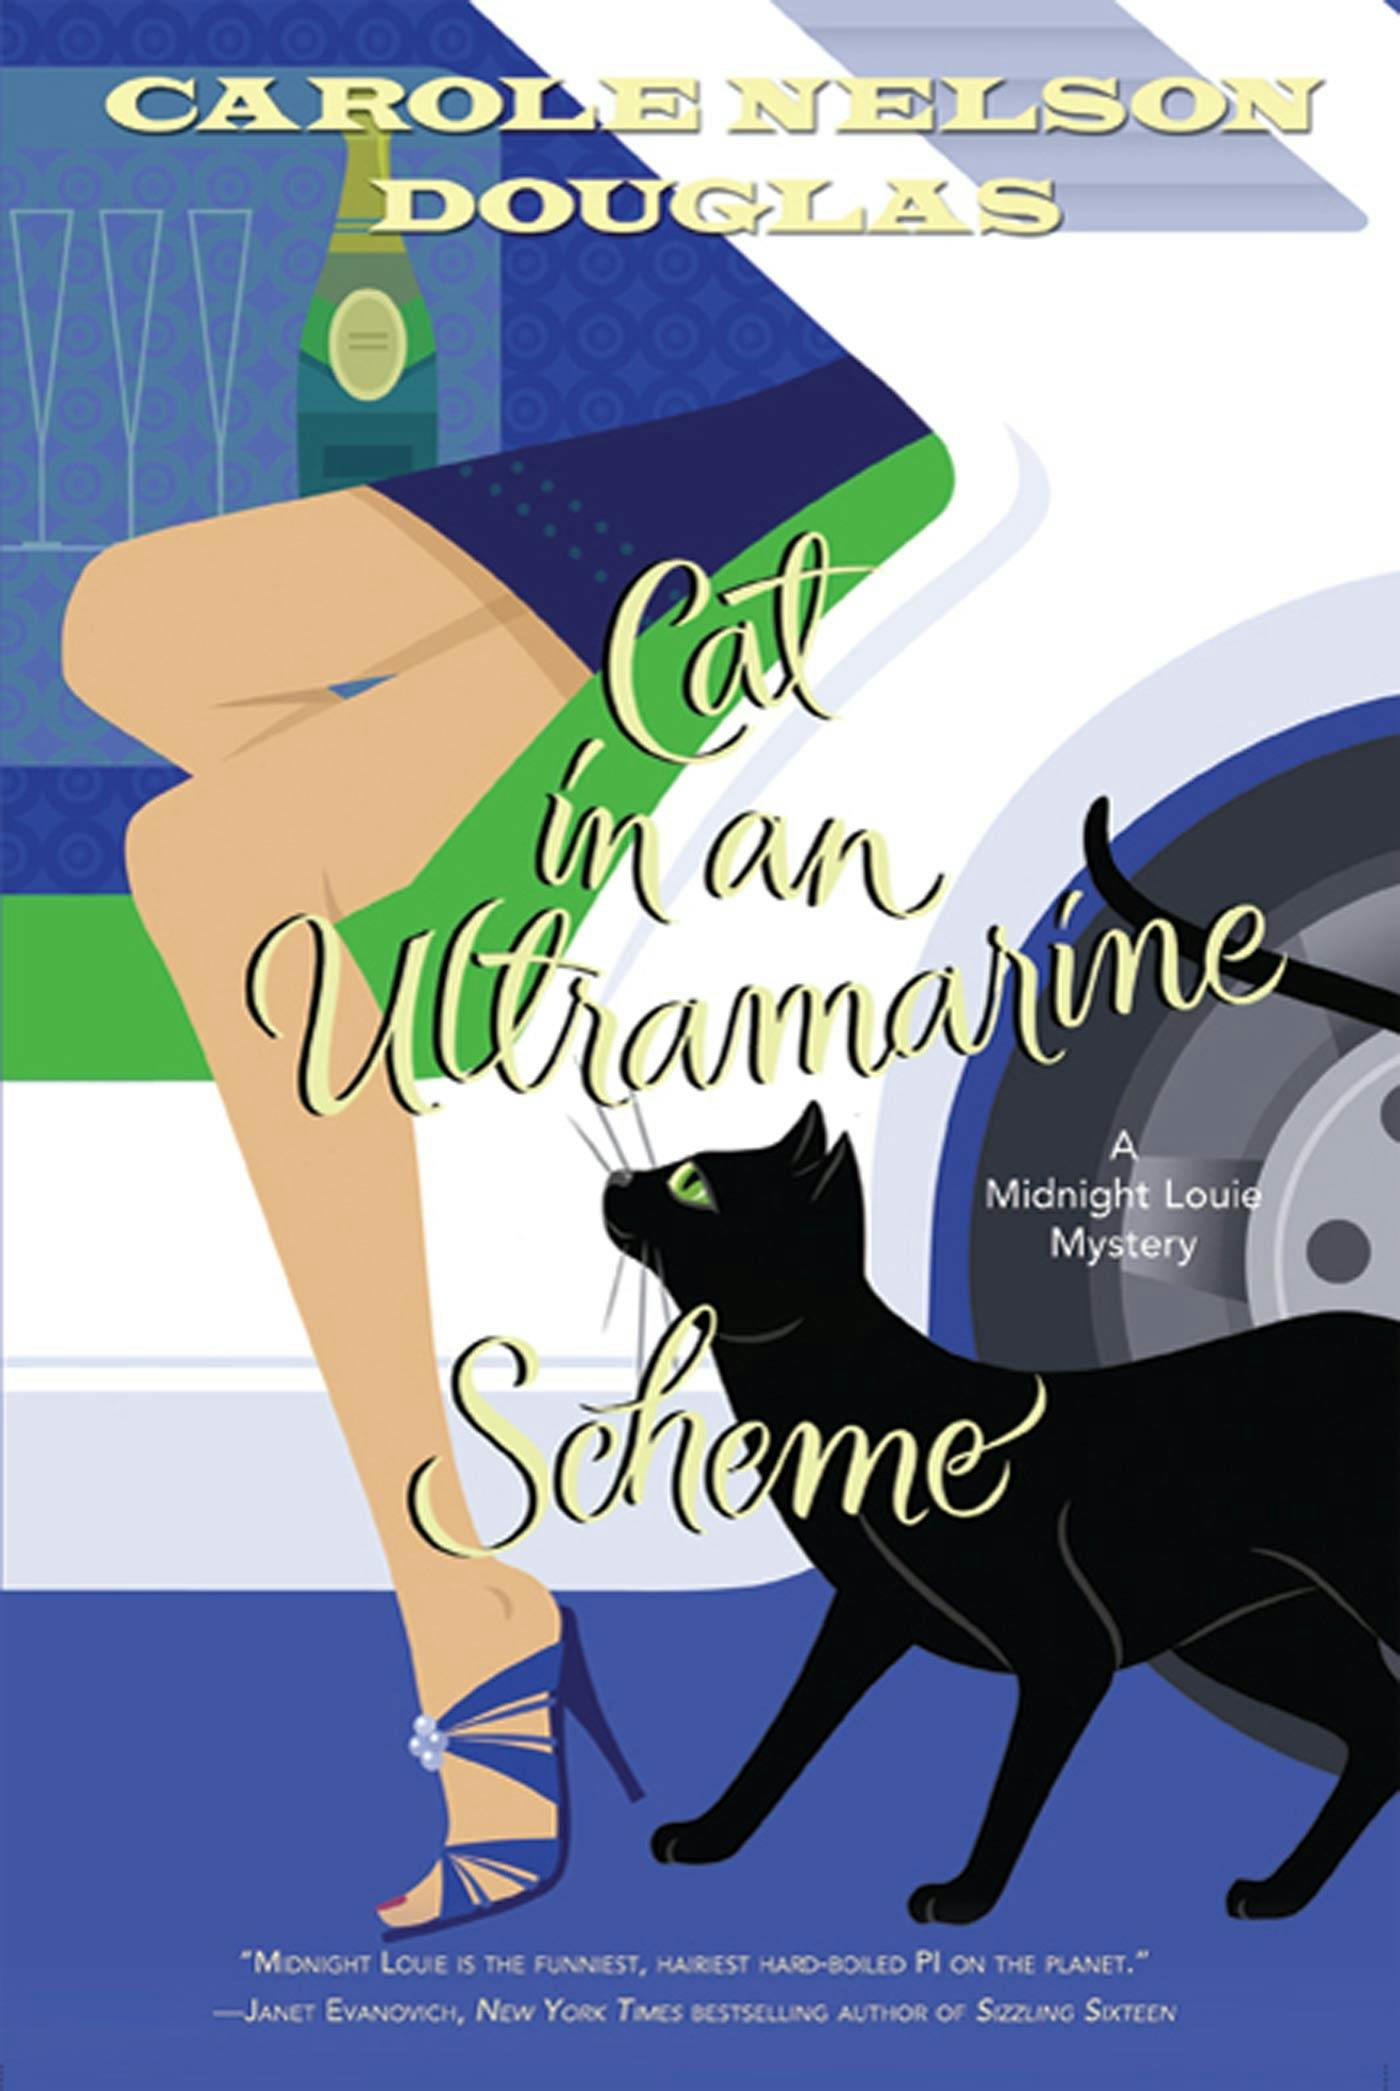 Cover for the book titled as: Cat in an Ultramarine Scheme